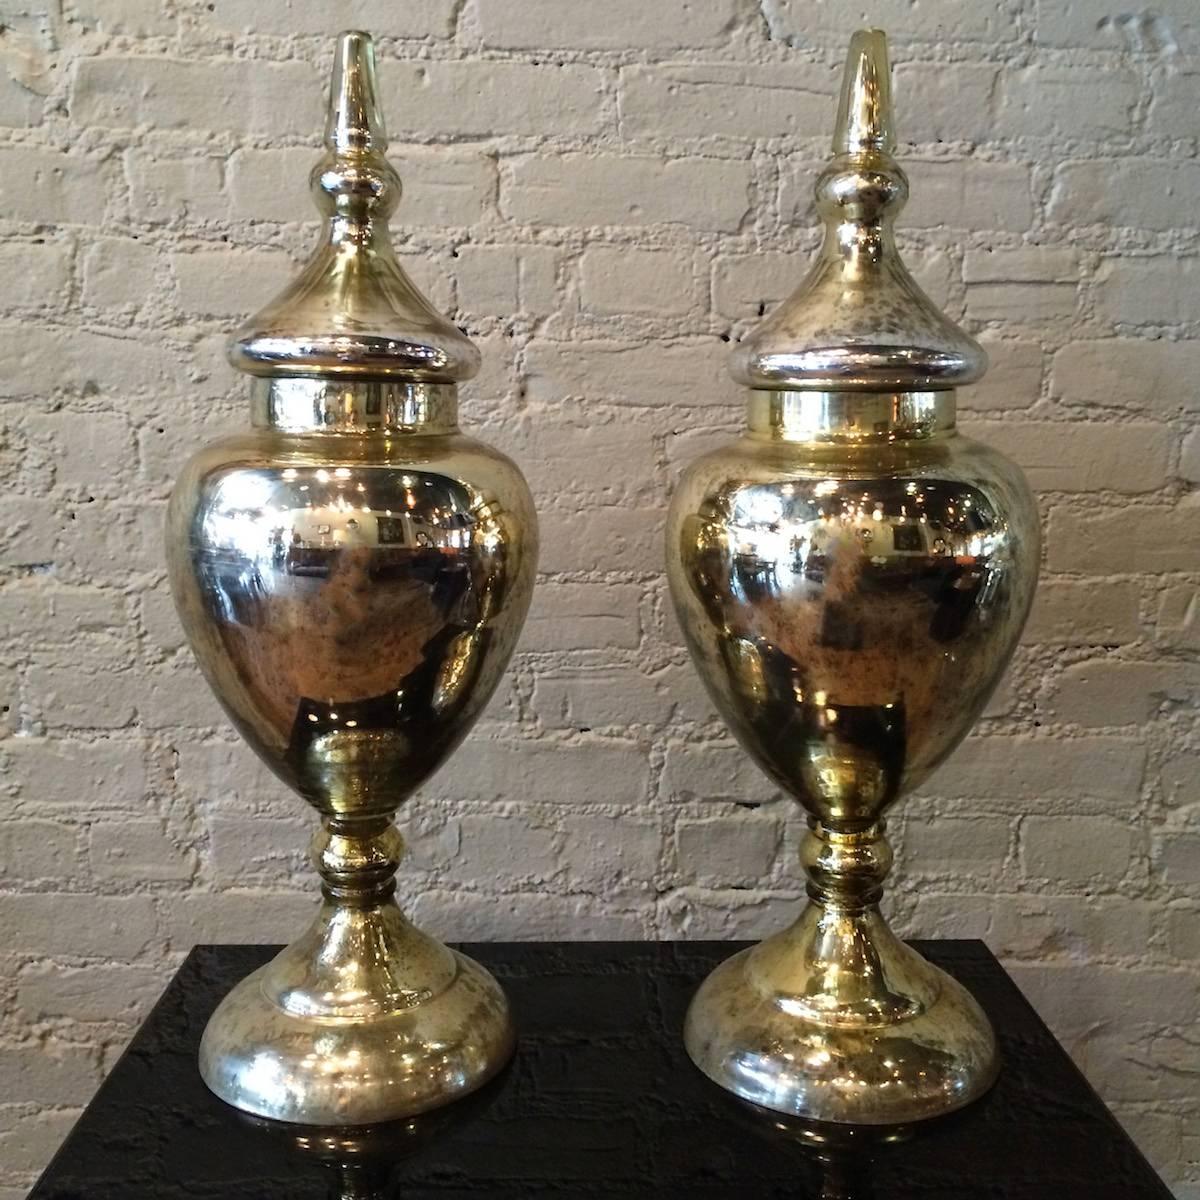 Pair of monumental, tall, mercury glass urns with decorative etching on the lids and faceted finials and overall lovely patina.